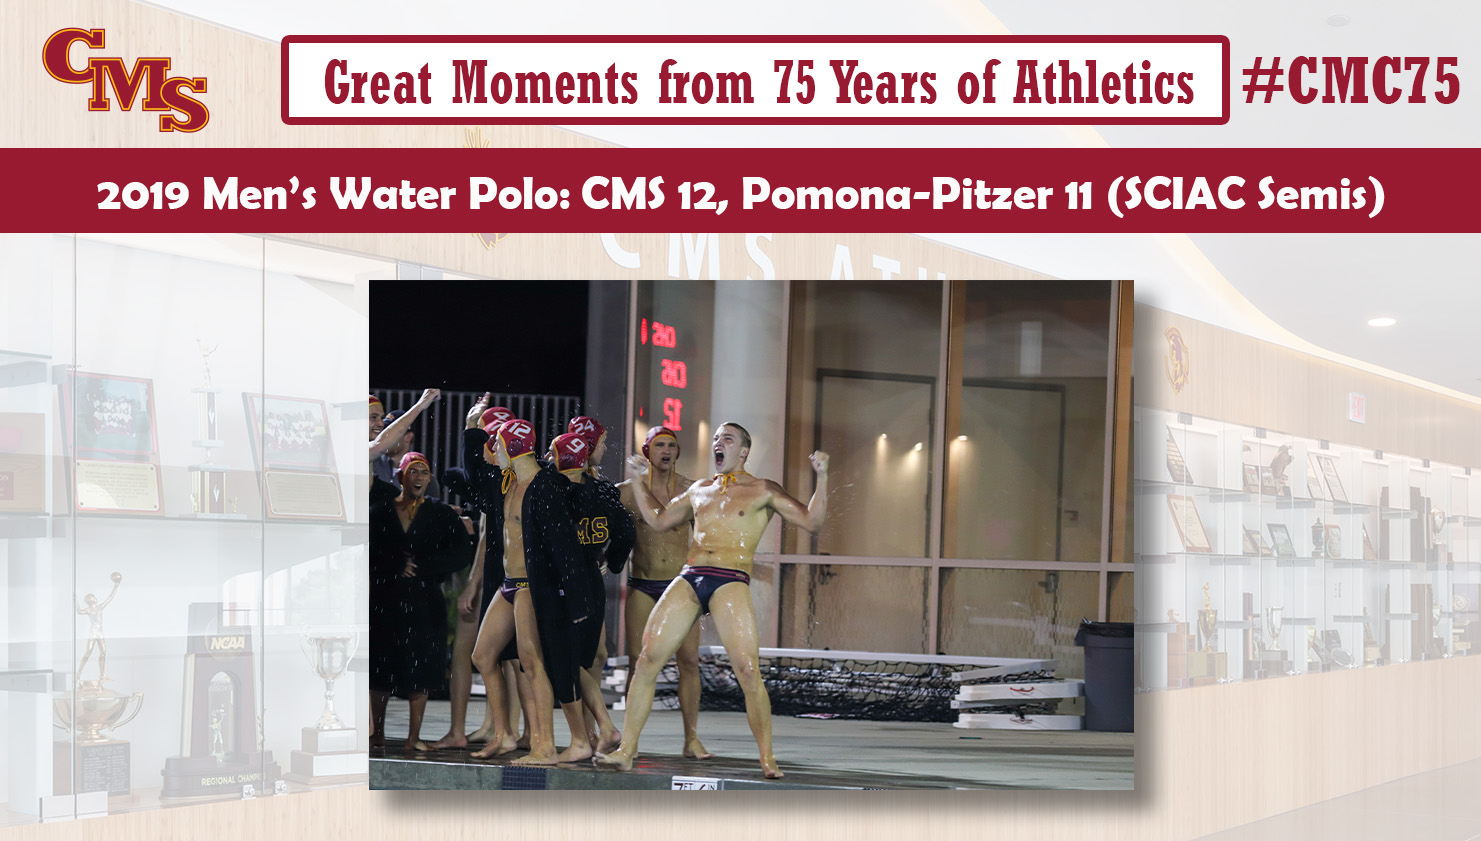 CMS celebrates its win over Pomona-Pitzer in the 2019 SCIAC Men's Water Polo Semifinals. Words over the photo read: Great Moments from 75 Years of Athletics, 2019 Men's Water Polo: CMS 12, Pomona-Pitzer 11 (SCIAC Semis)